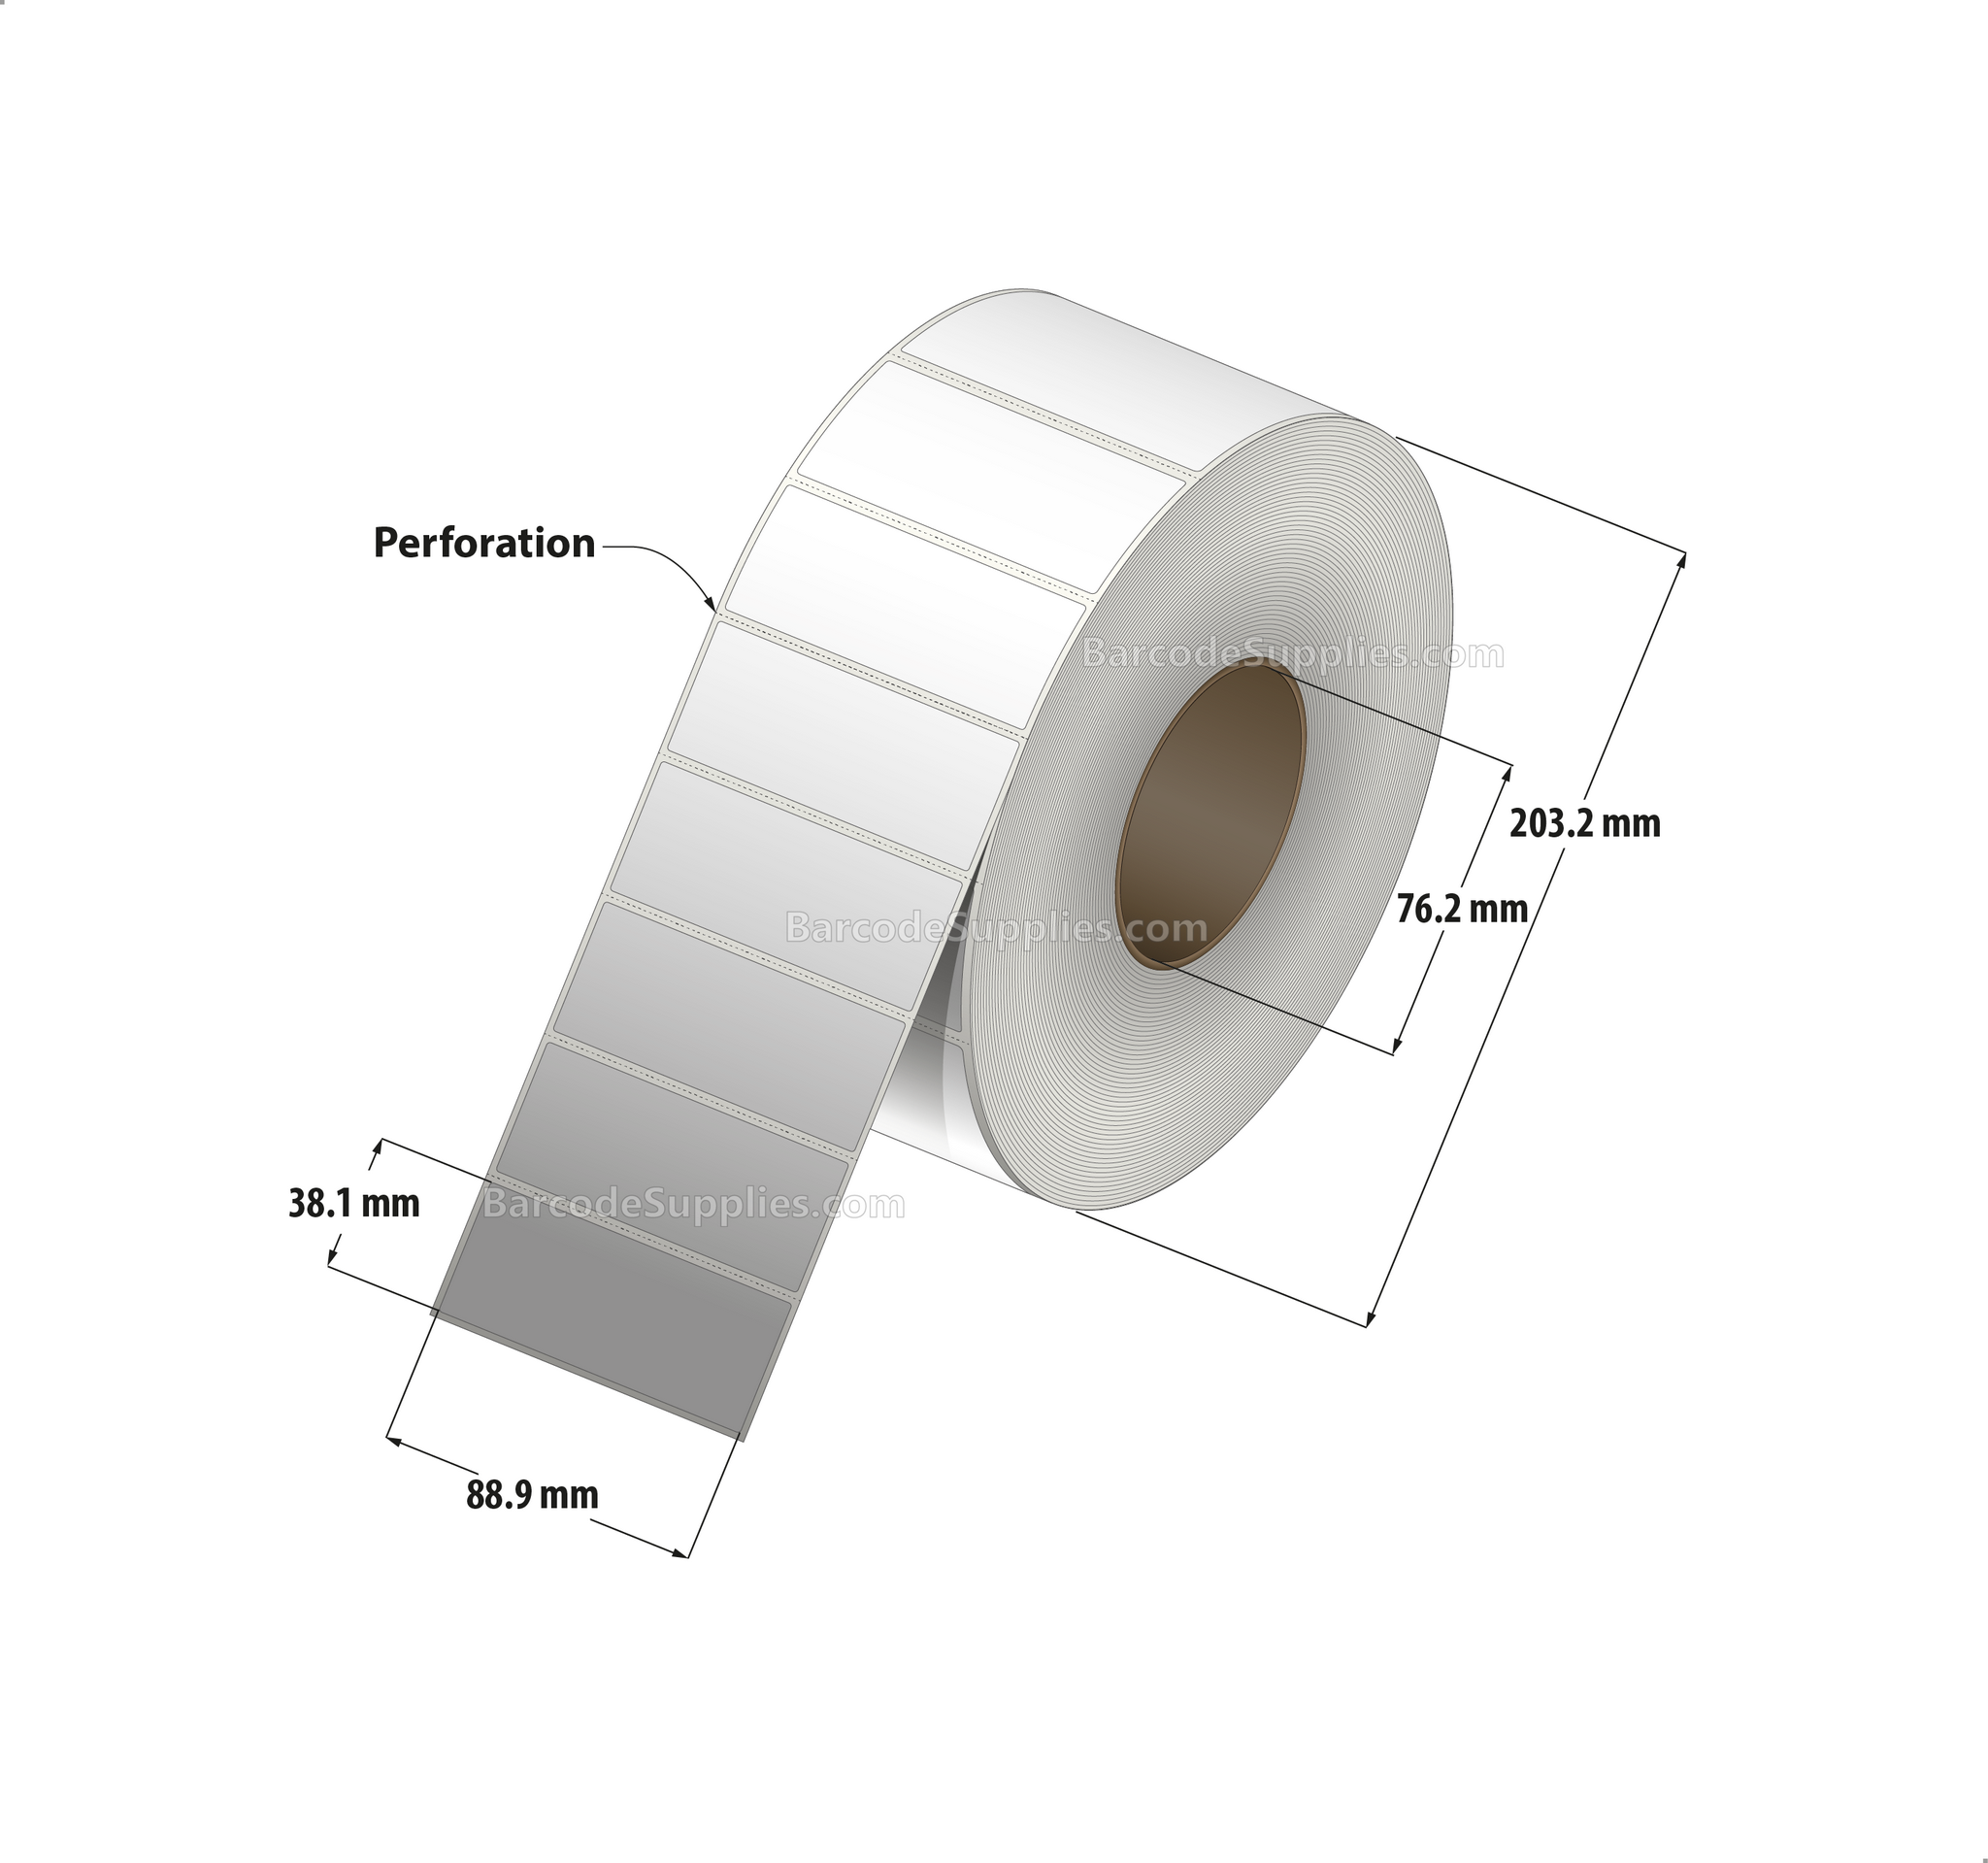 3.5 x 1.5 Thermal Transfer White Labels With Permanent Adhesive - Perforated - 3600 Labels Per Roll - Carton Of 4 Rolls - 14400 Labels Total - MPN: RT-35-15-3600-3